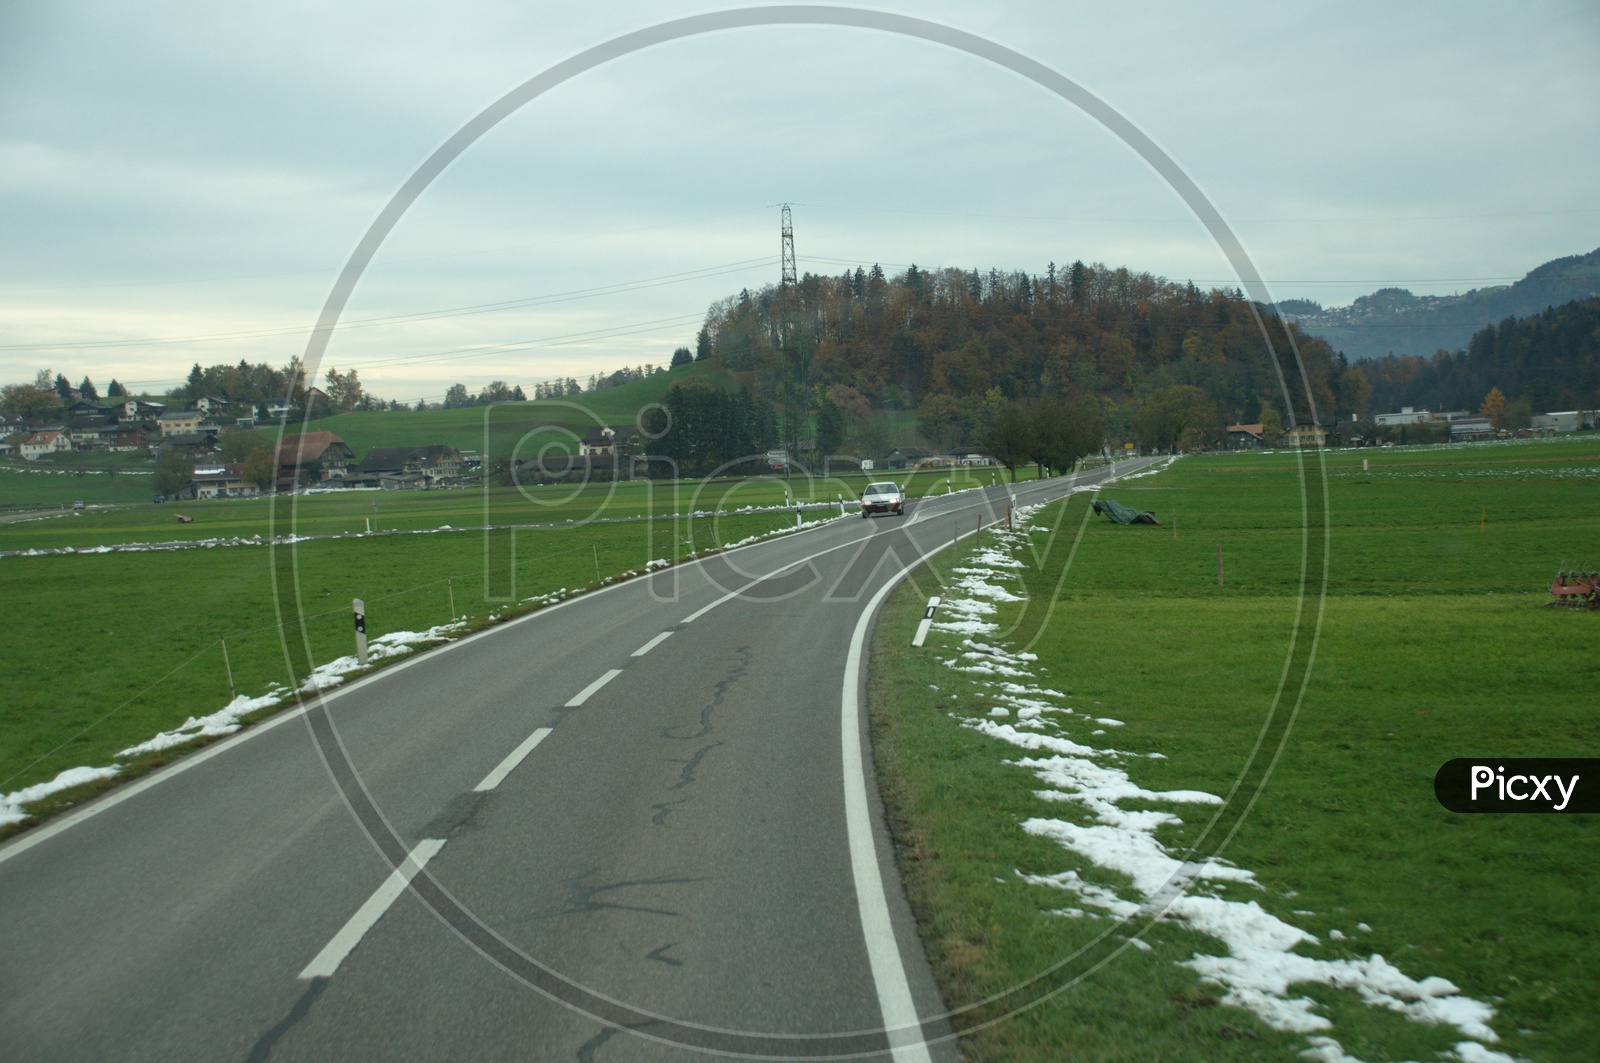 View of Roadway through the green meadow